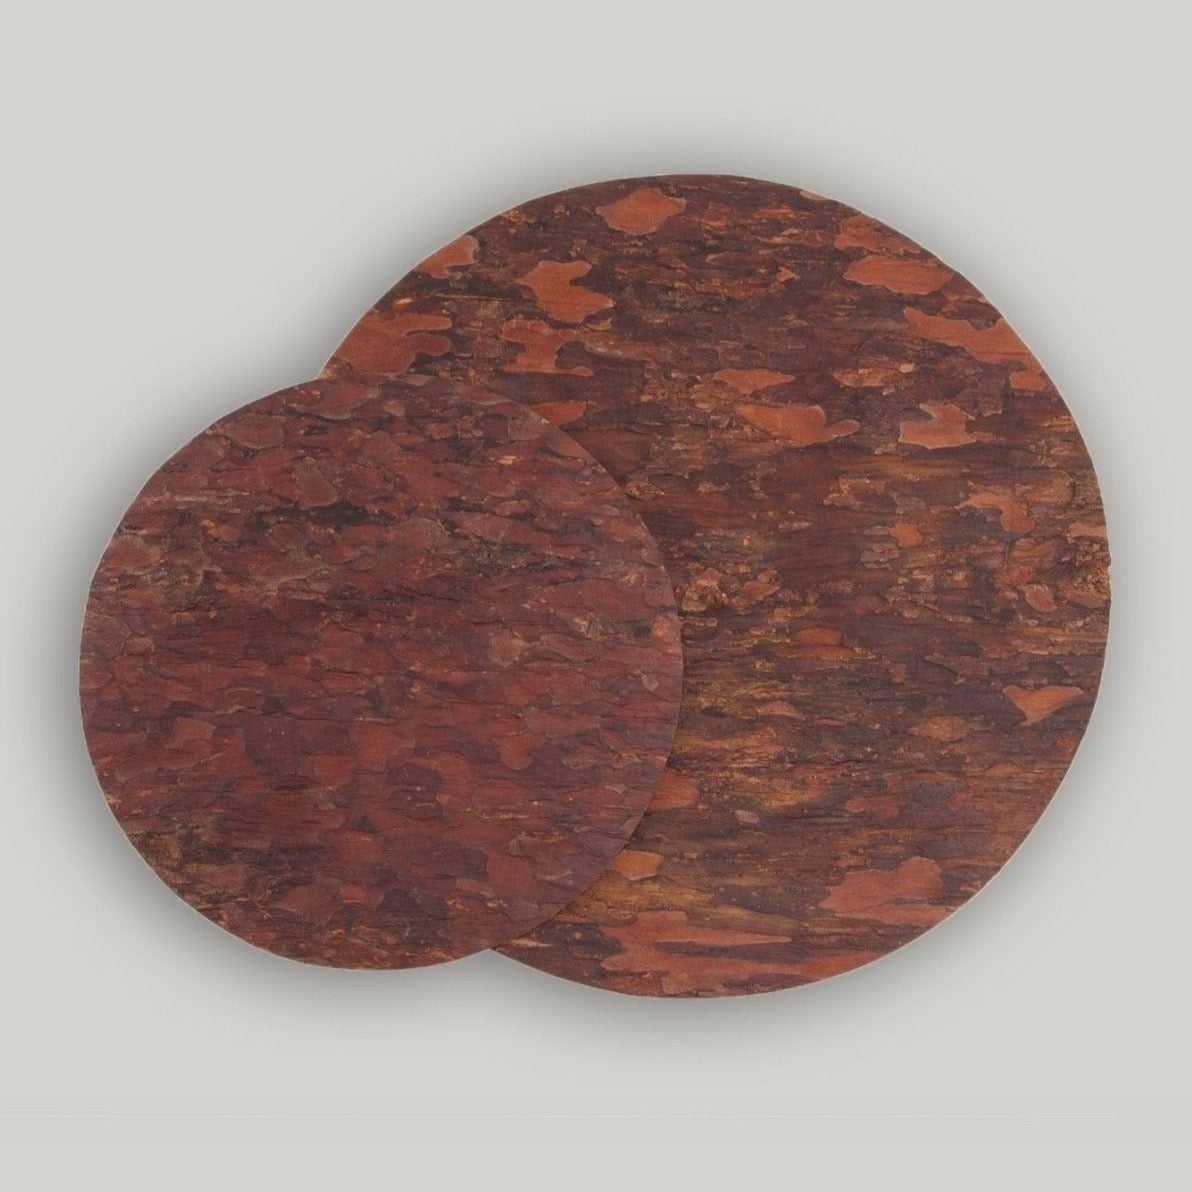 the-home-of-sustainable-things-pine-bark-placemat-pineskins-studio-sarmite 